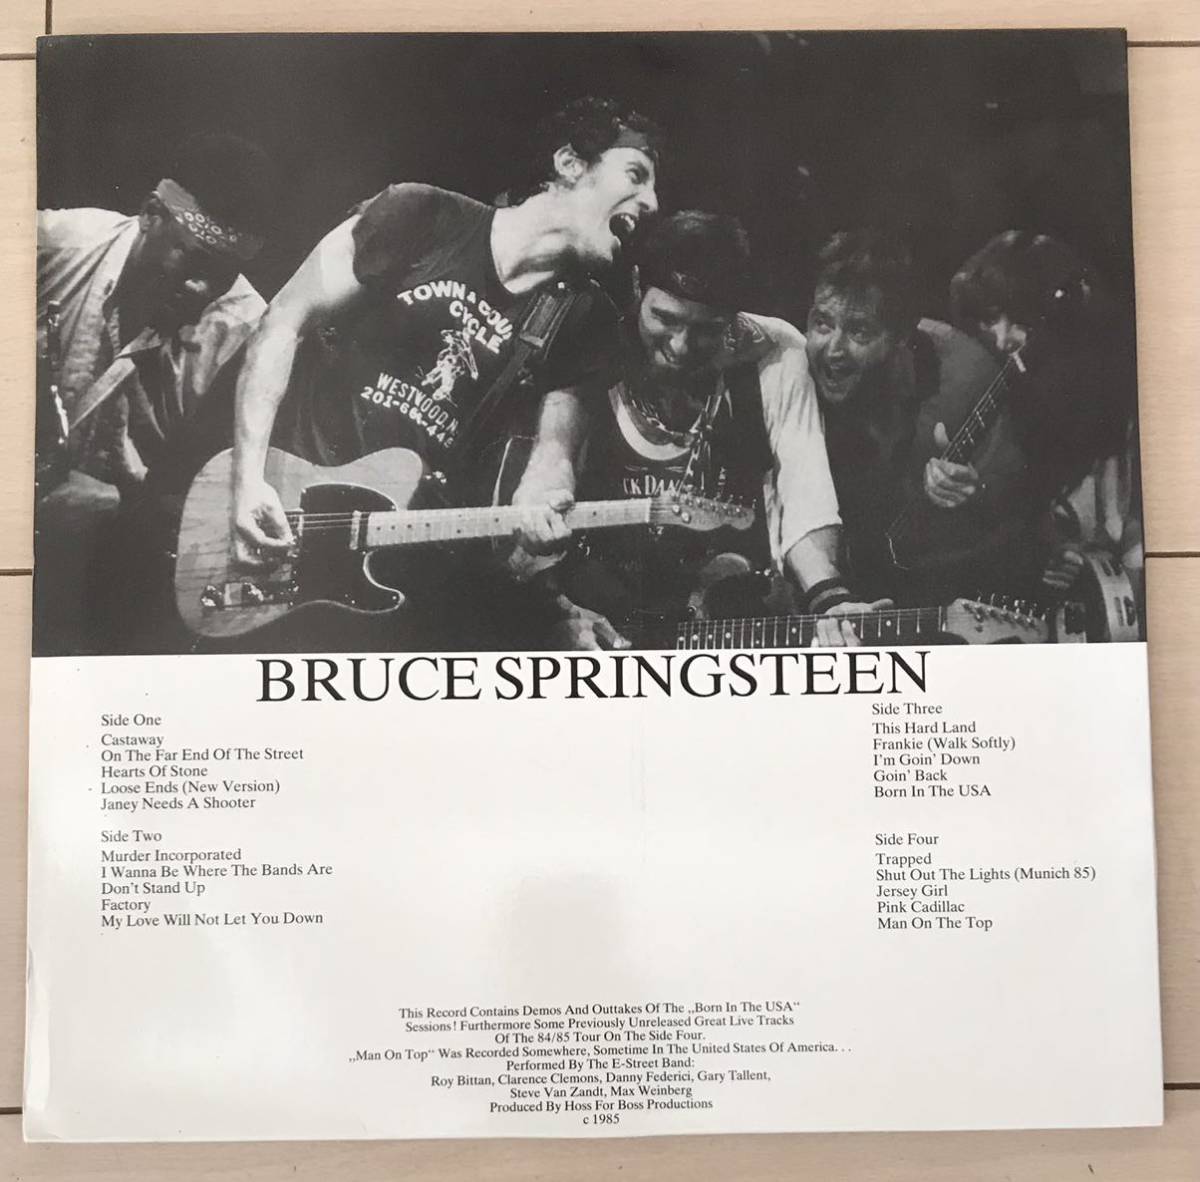 ■BRUCE SPRINGSTEEN■ブルーススプリングスティーン■Smalltown Boy / 2LP / Demos and Outtakes of “Born In The U.S.A.” / 歴史的名盤_画像2